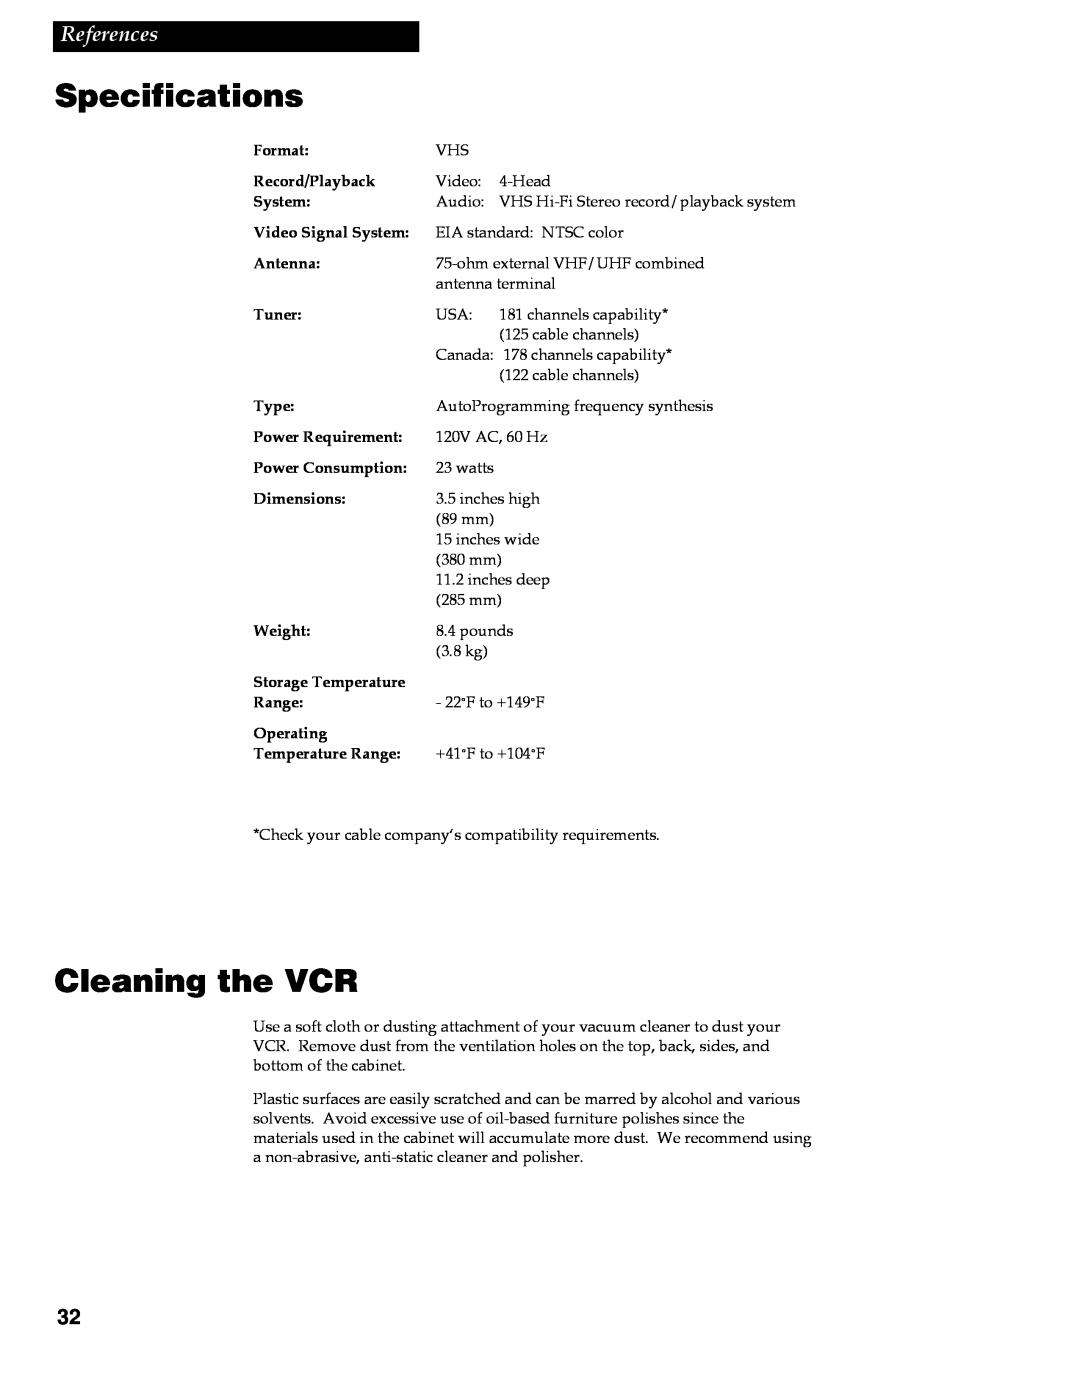 RCA VR642HF manual Specifications, Cleaning the VCR, References 